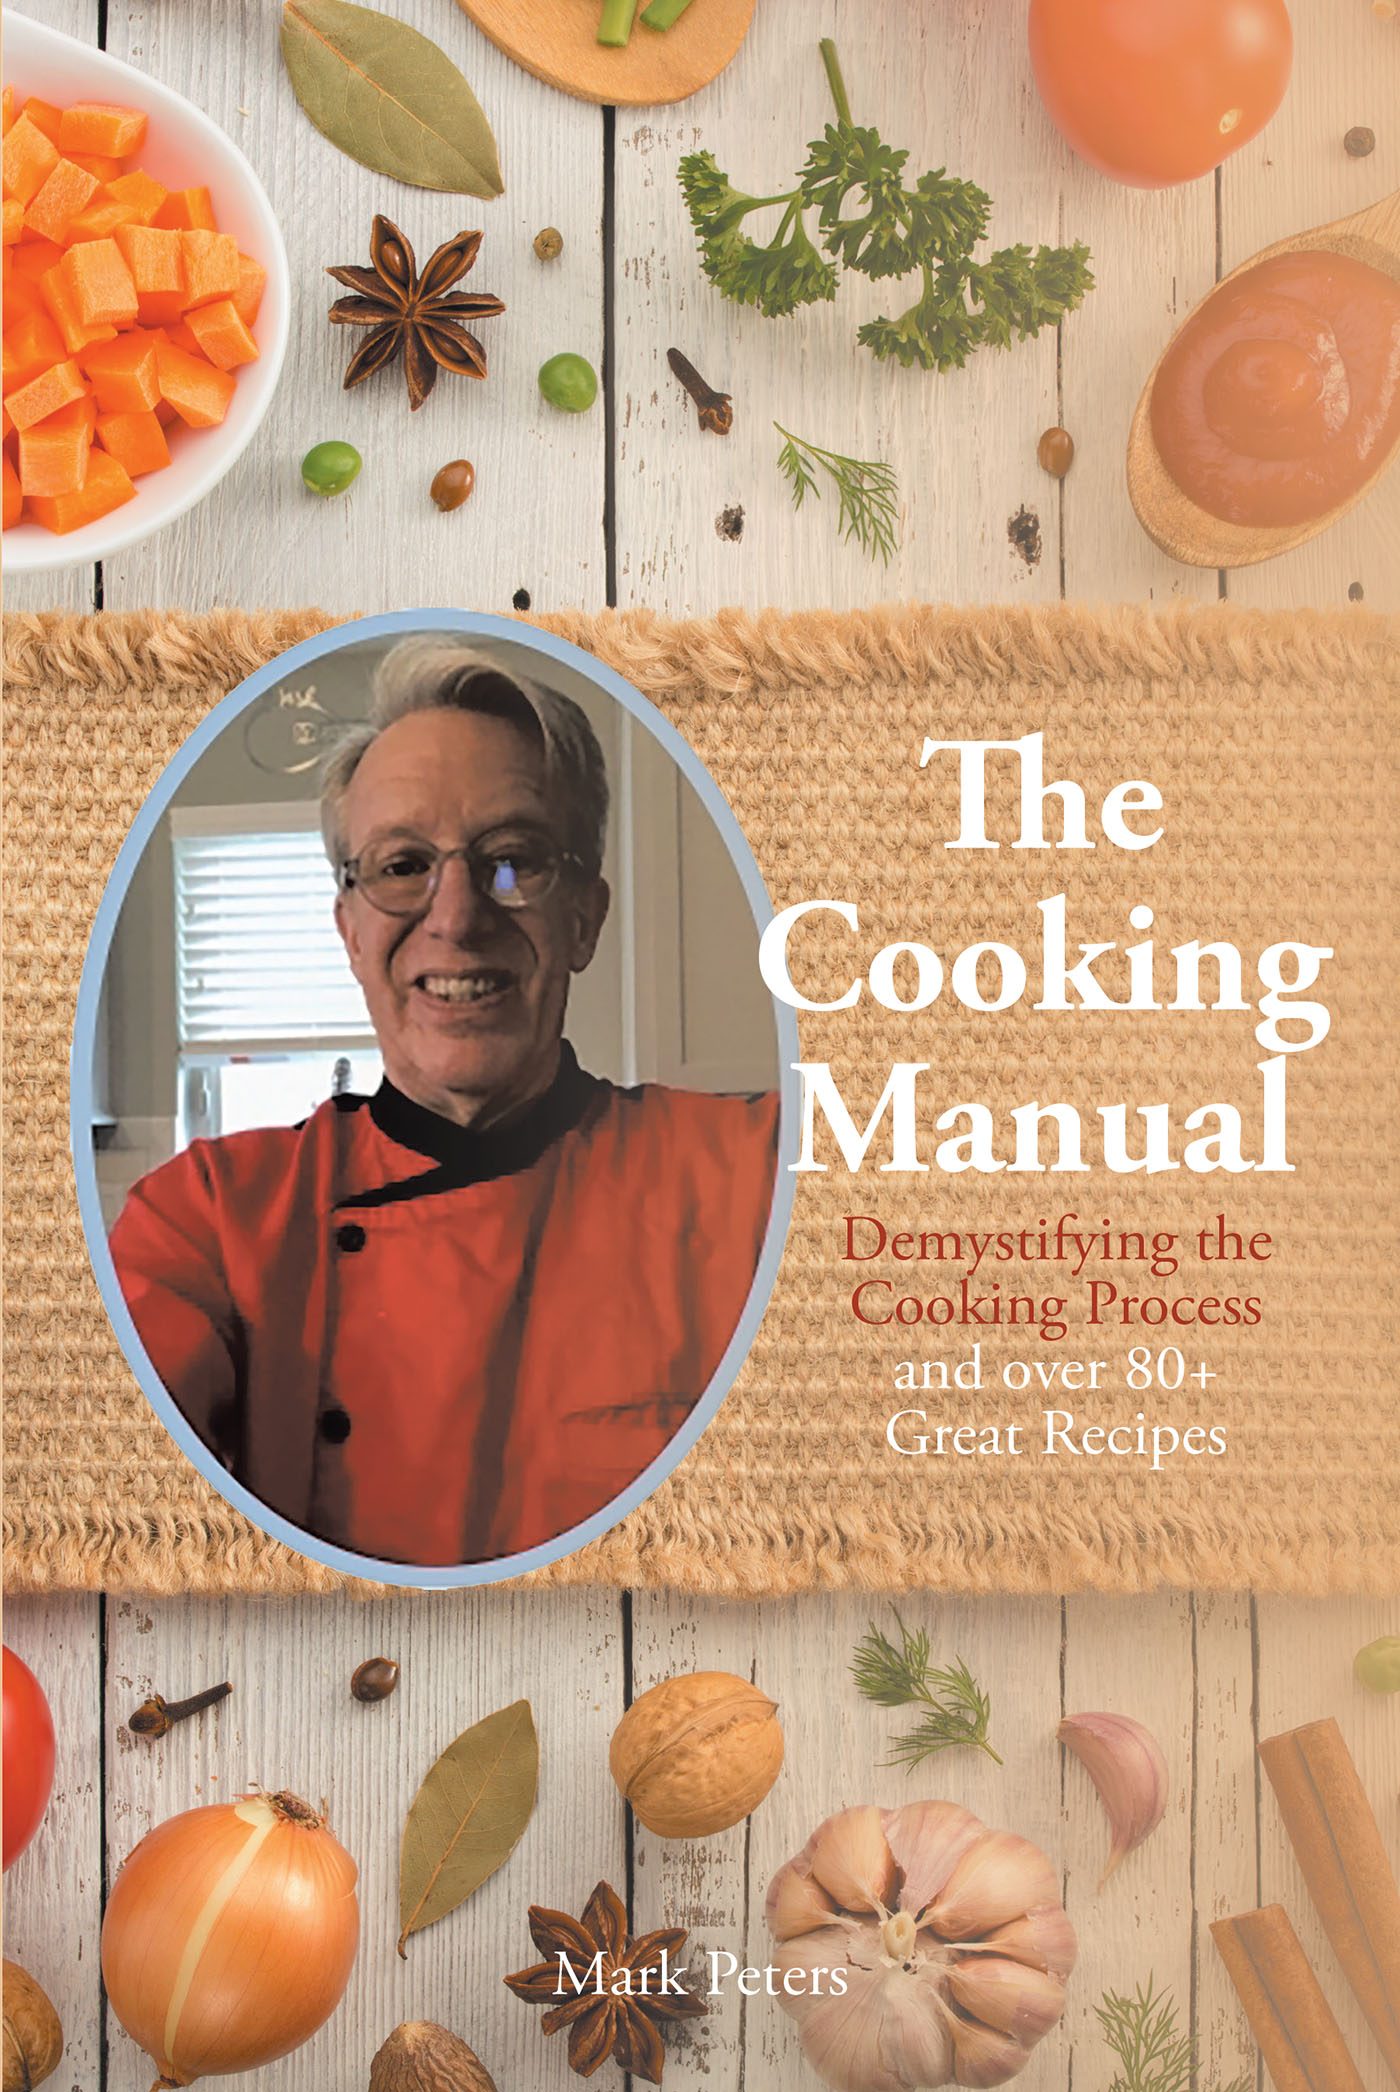 Mark Peters’s Newly Released “The Cooking Manual: Demystifying the Cooking Process and over 80+ Great Recipes” is an Enjoyable Celebration of the Art of Cooking